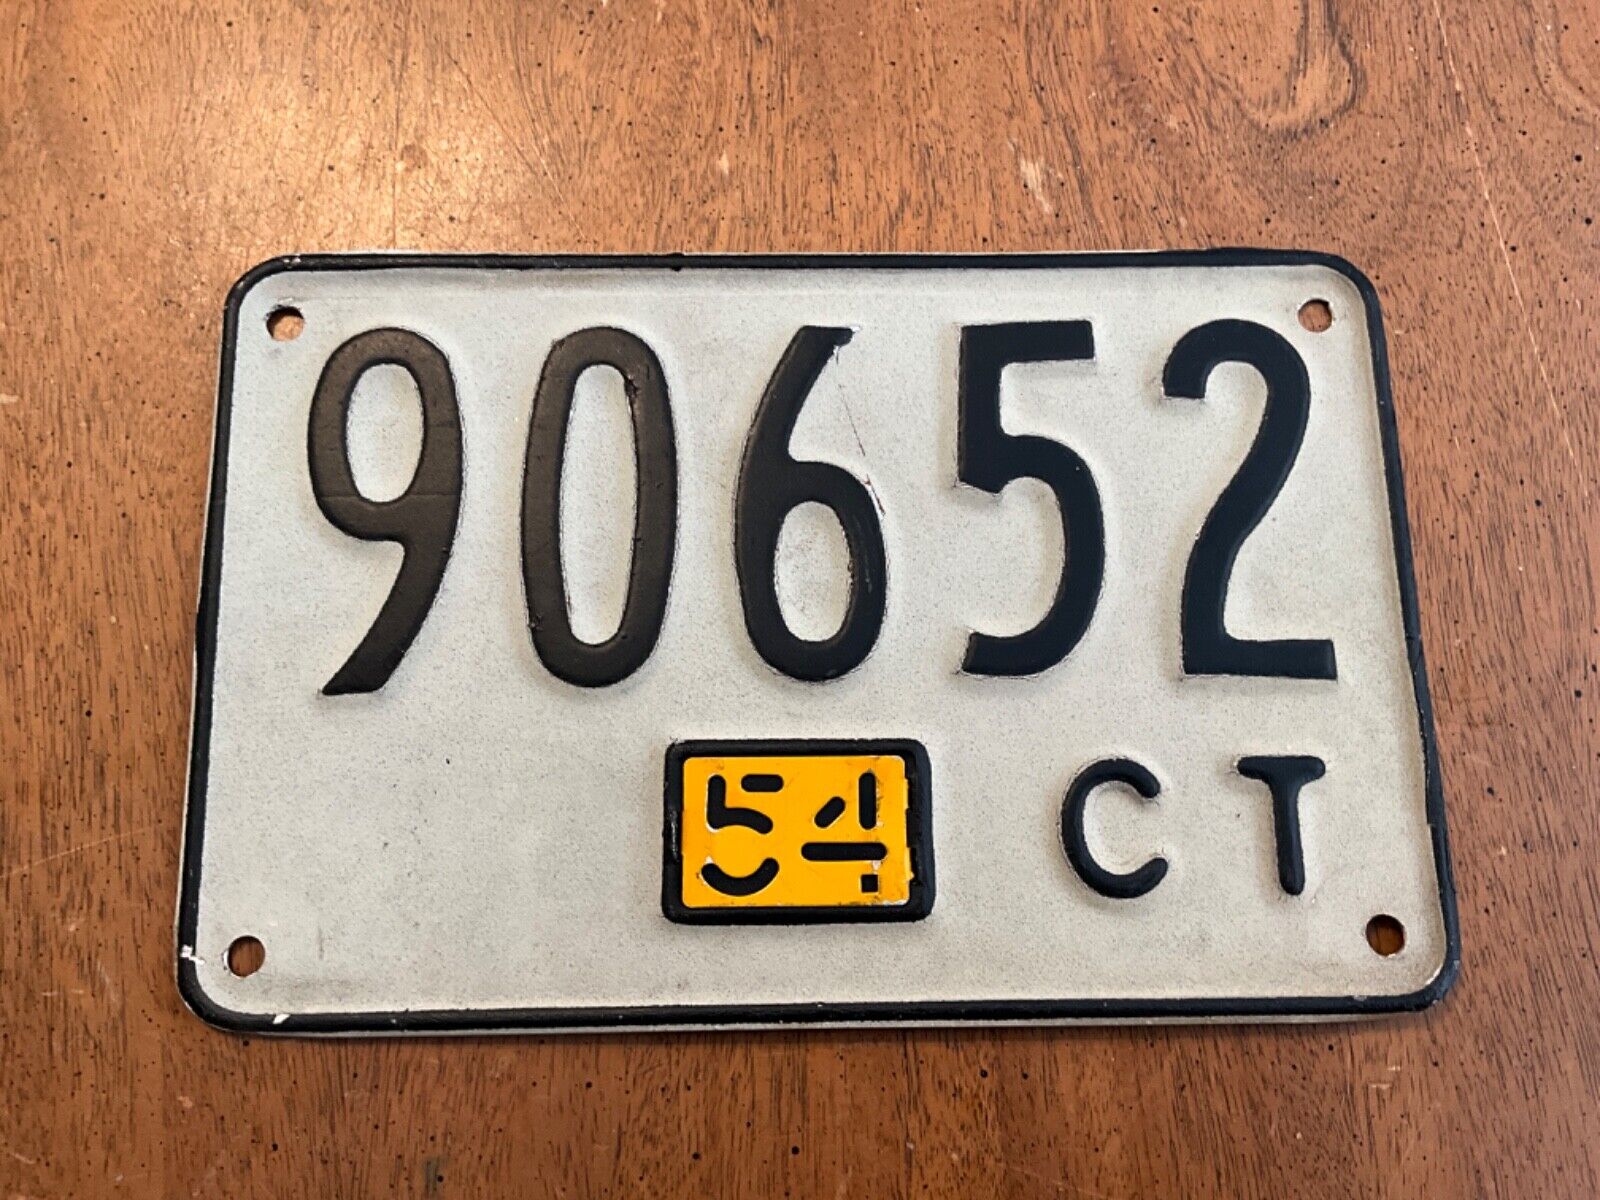 1954 Connecticut License Plate Tag 90652